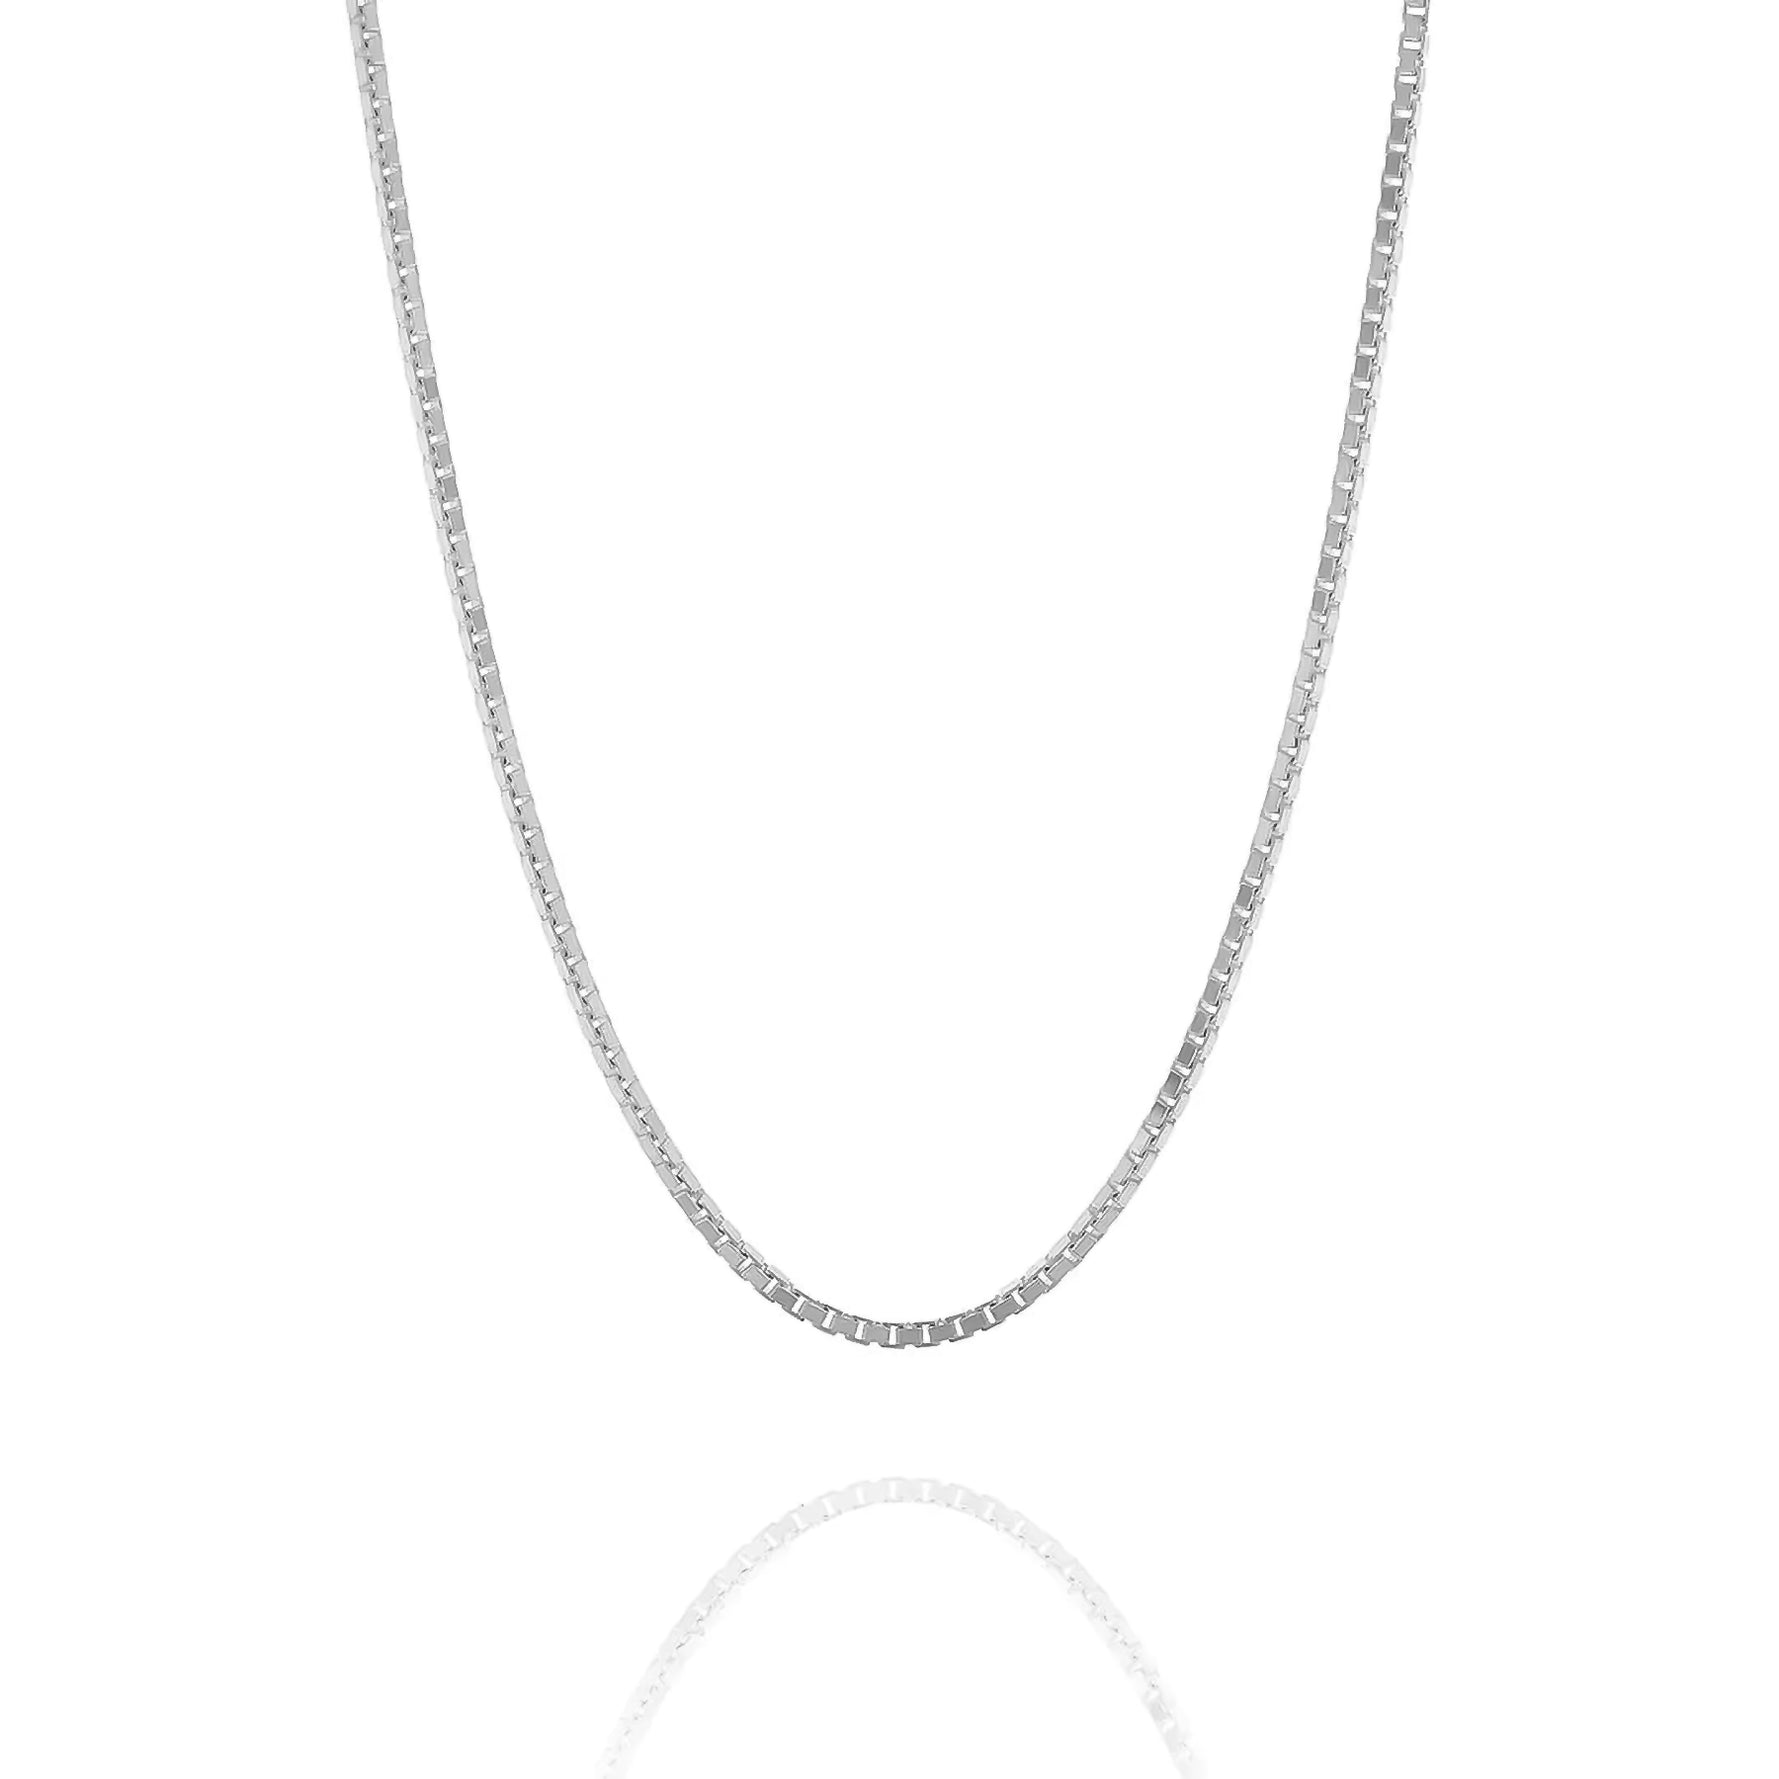 1.4MM STERLING SILVER BOX CHAINS